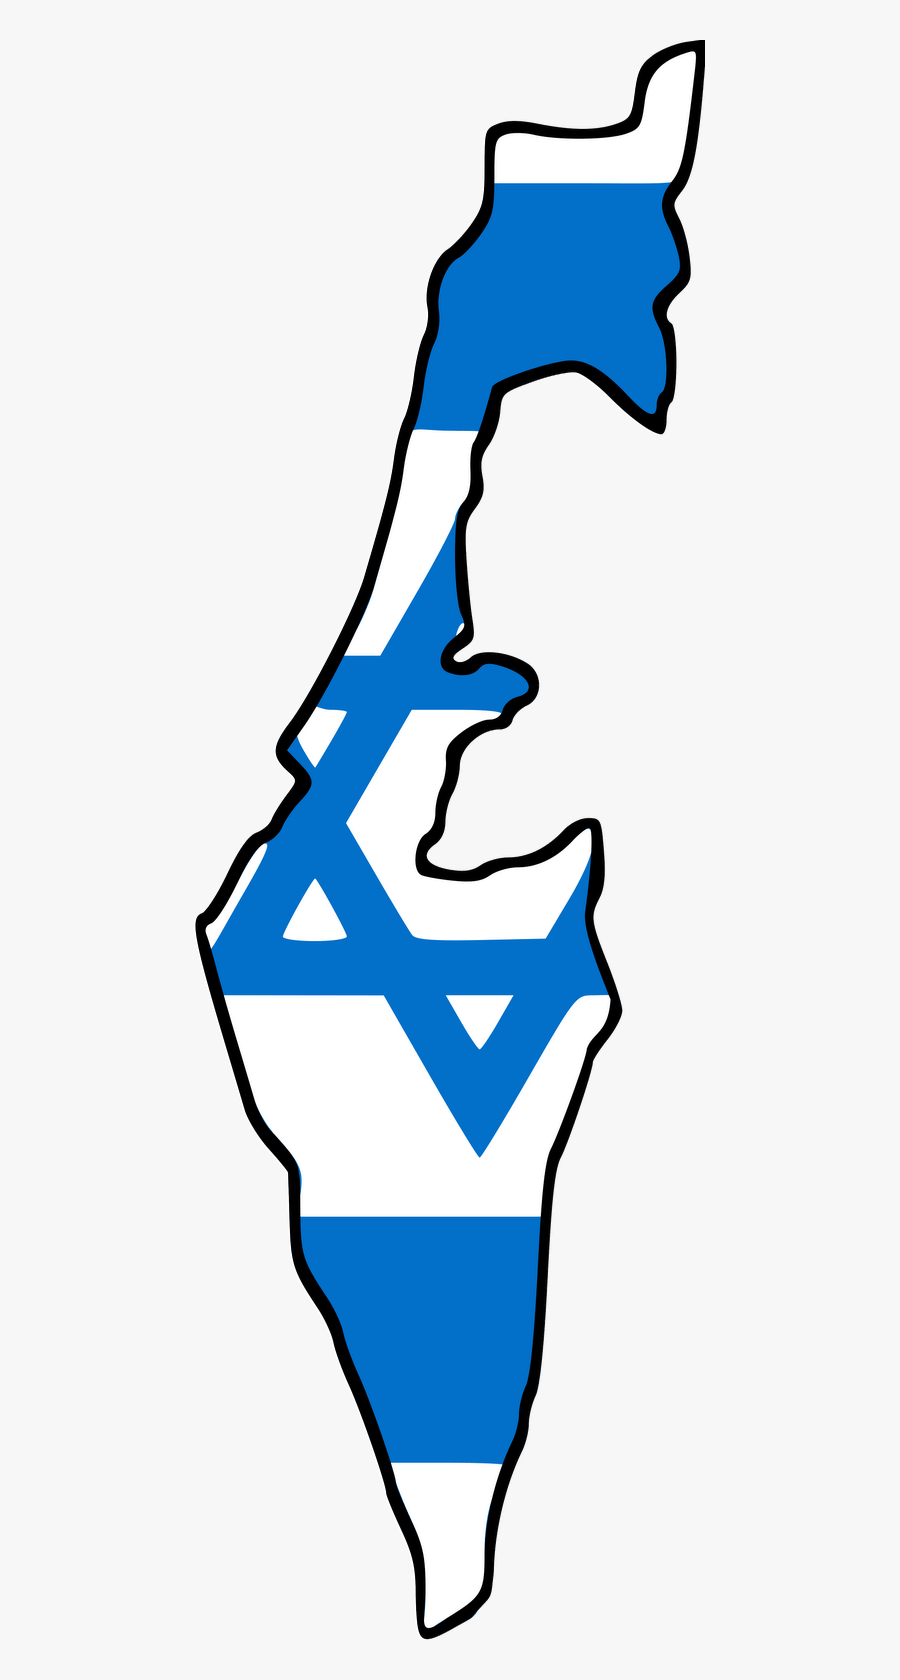 Flag Of Israel Graphics Flag Map Image Clip Art - Israel Flag And Country, Transparent Clipart